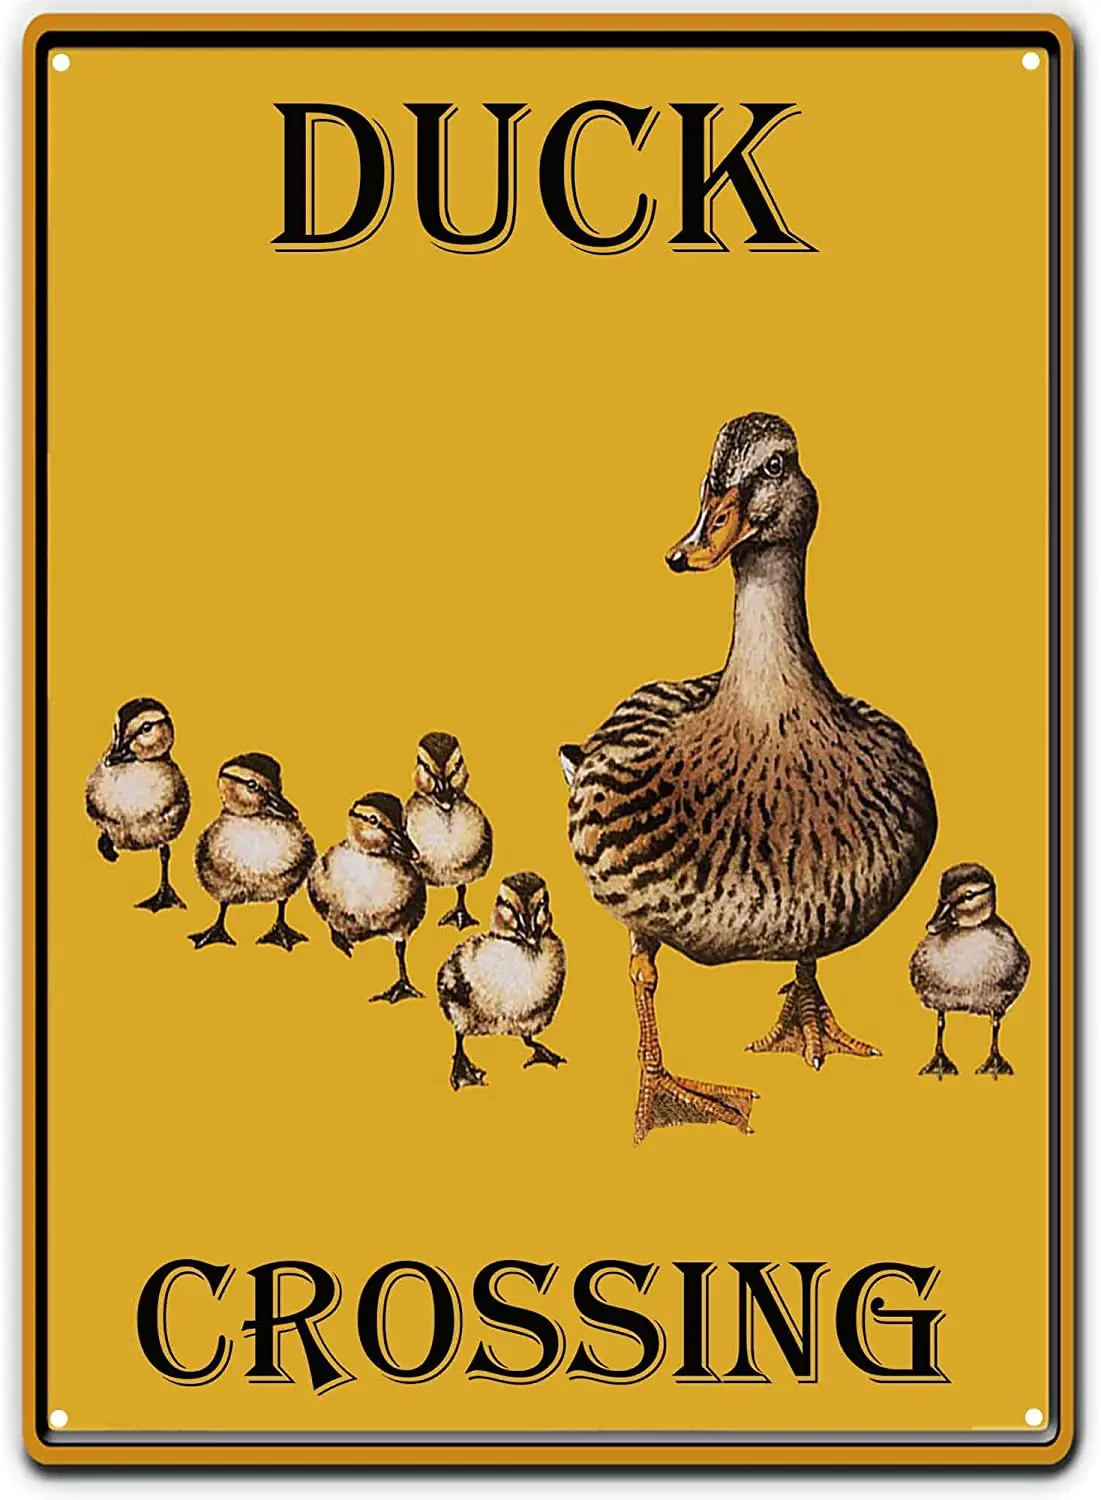 

NOT Duck Crossing Tin Sign Vintage Iron Painting Wall Decorative Trend Popular Poster Handmade Art for Bar Cafe Store Home